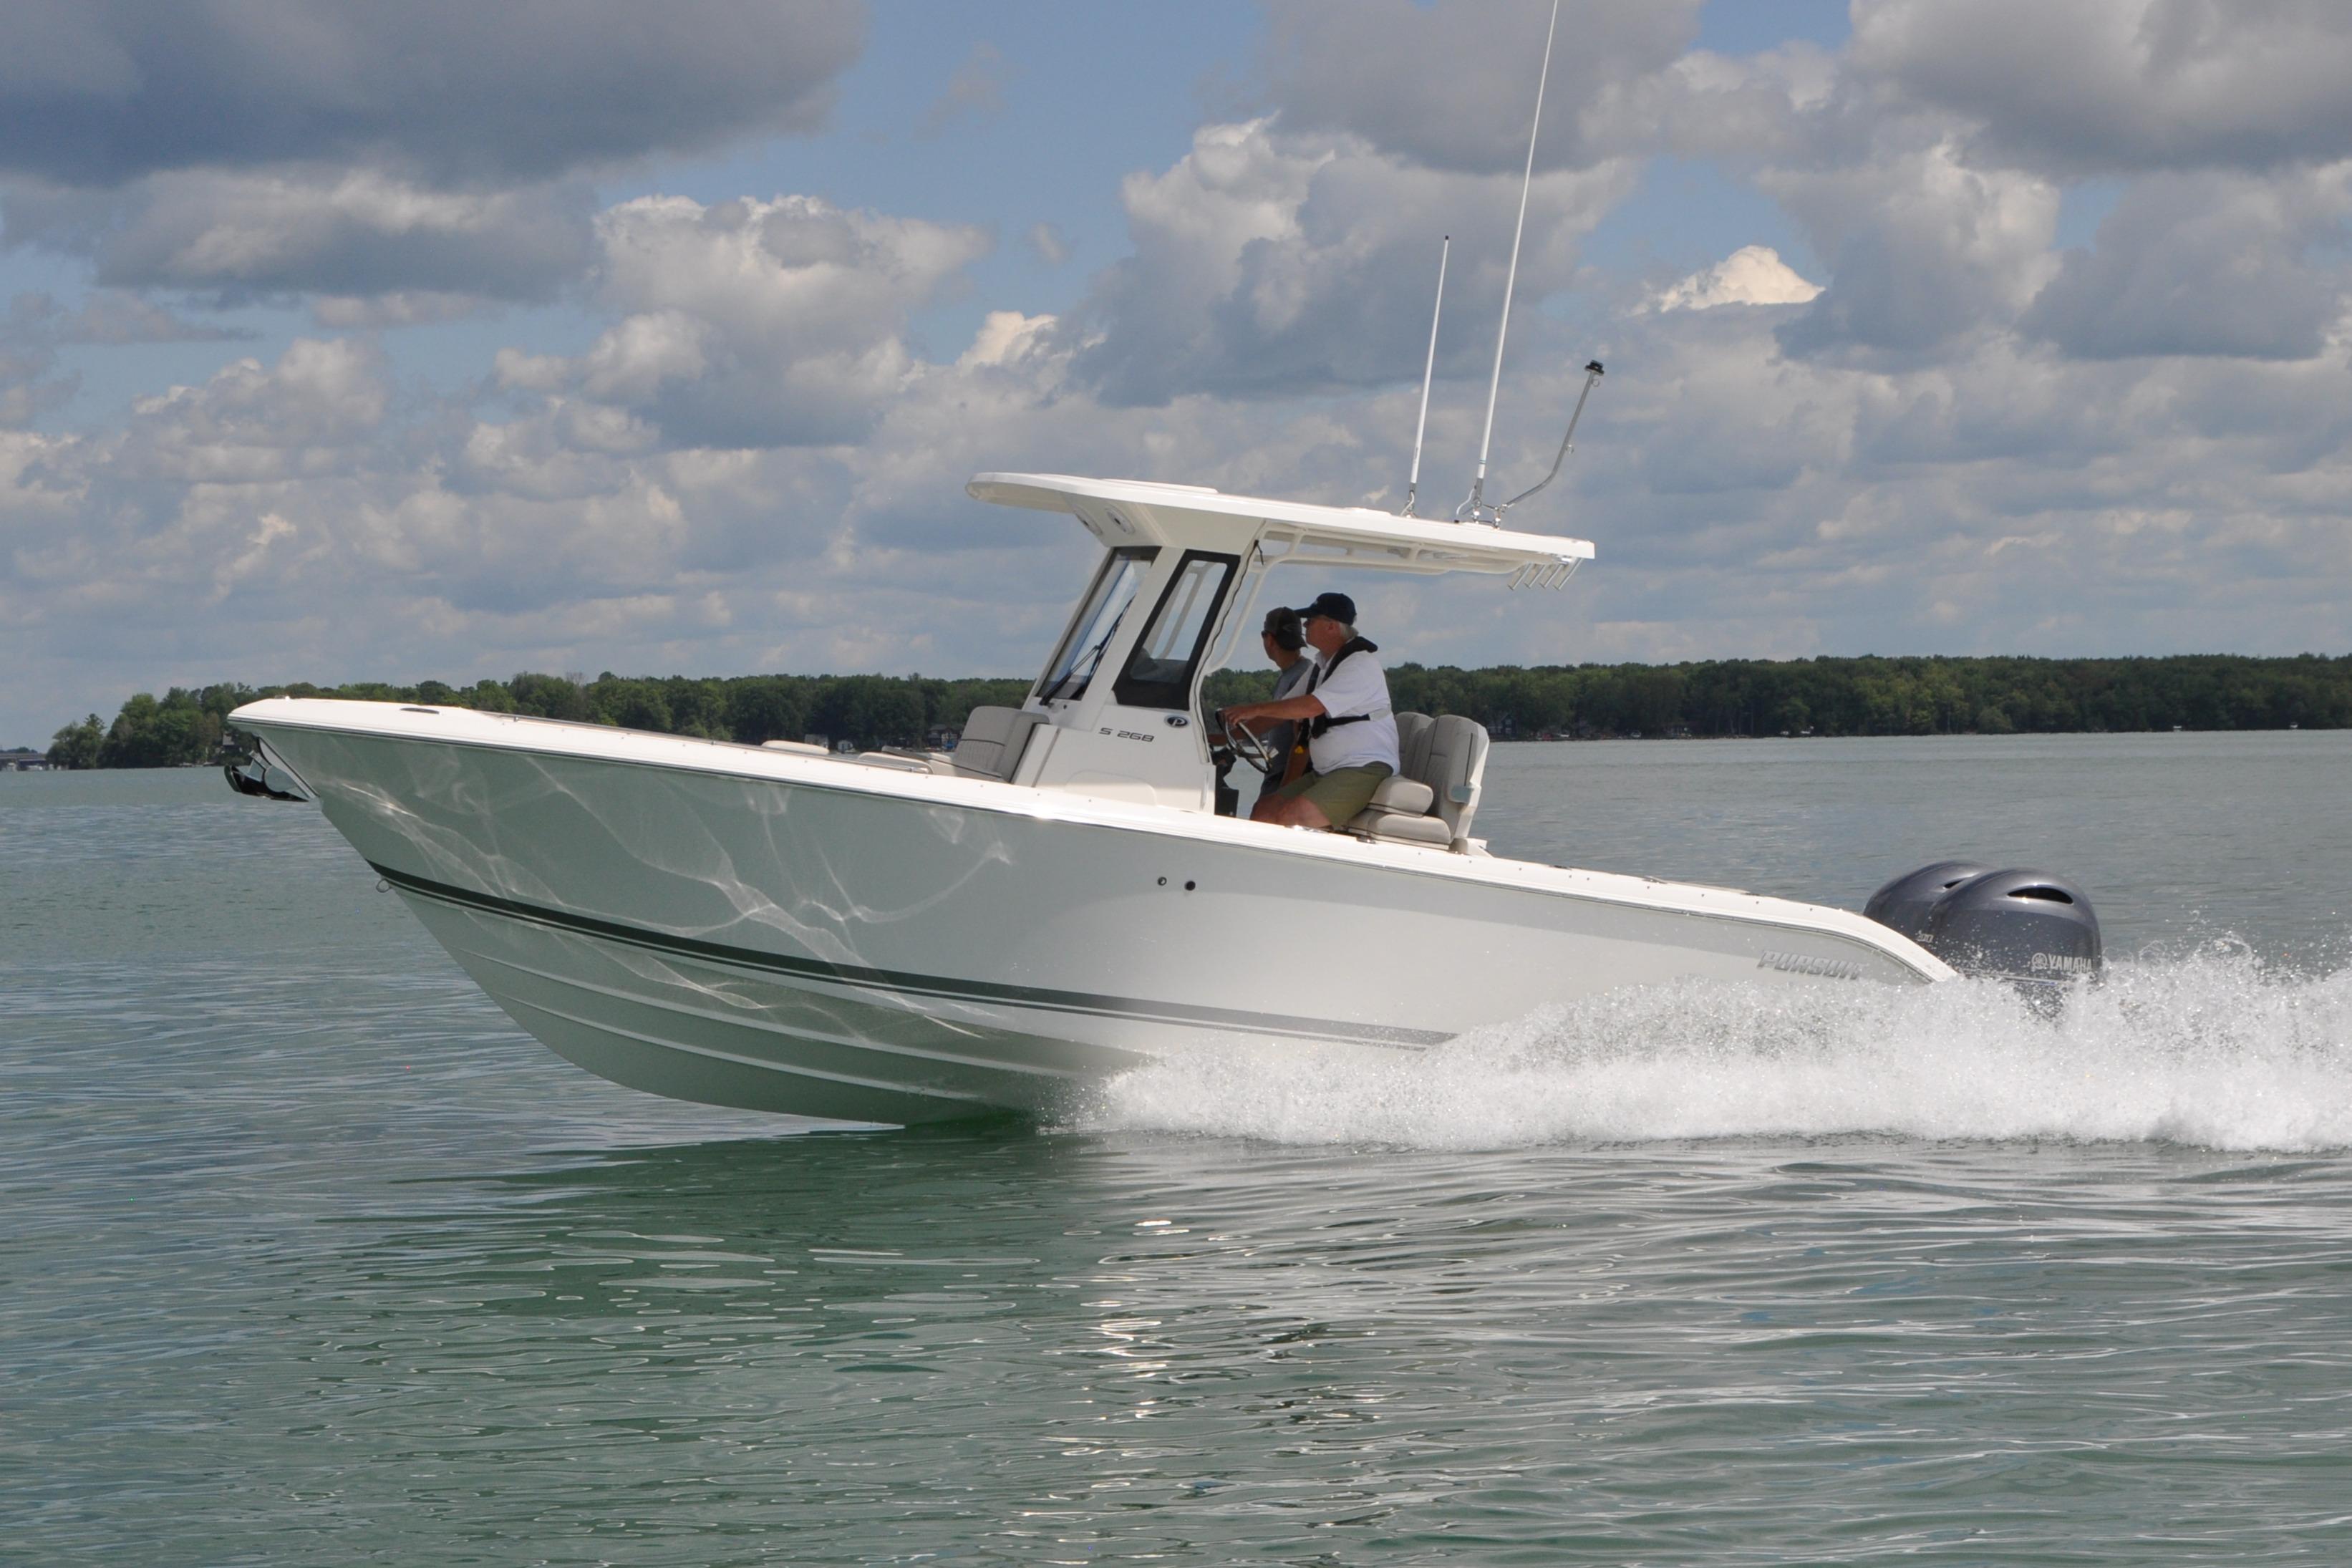 Pursuit Grows Sport Family of Luxury Family Fishing Boats - On The